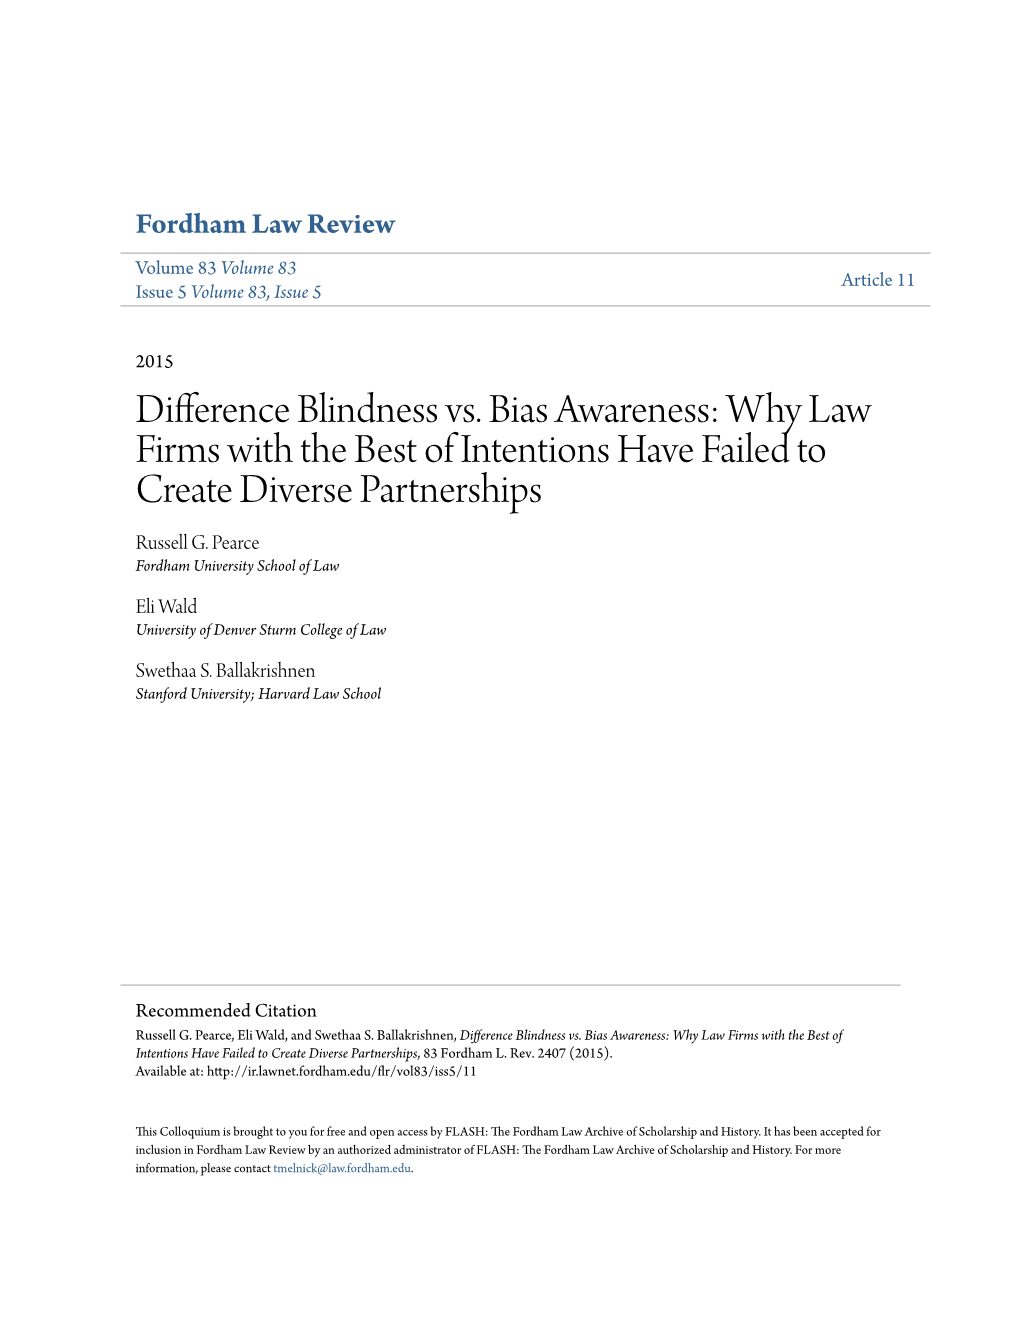 Difference Blindness Vs. Bias Awareness: Why Law Firms with the Best of Intentions Have Failed to Create Diverse Partnerships Russell G